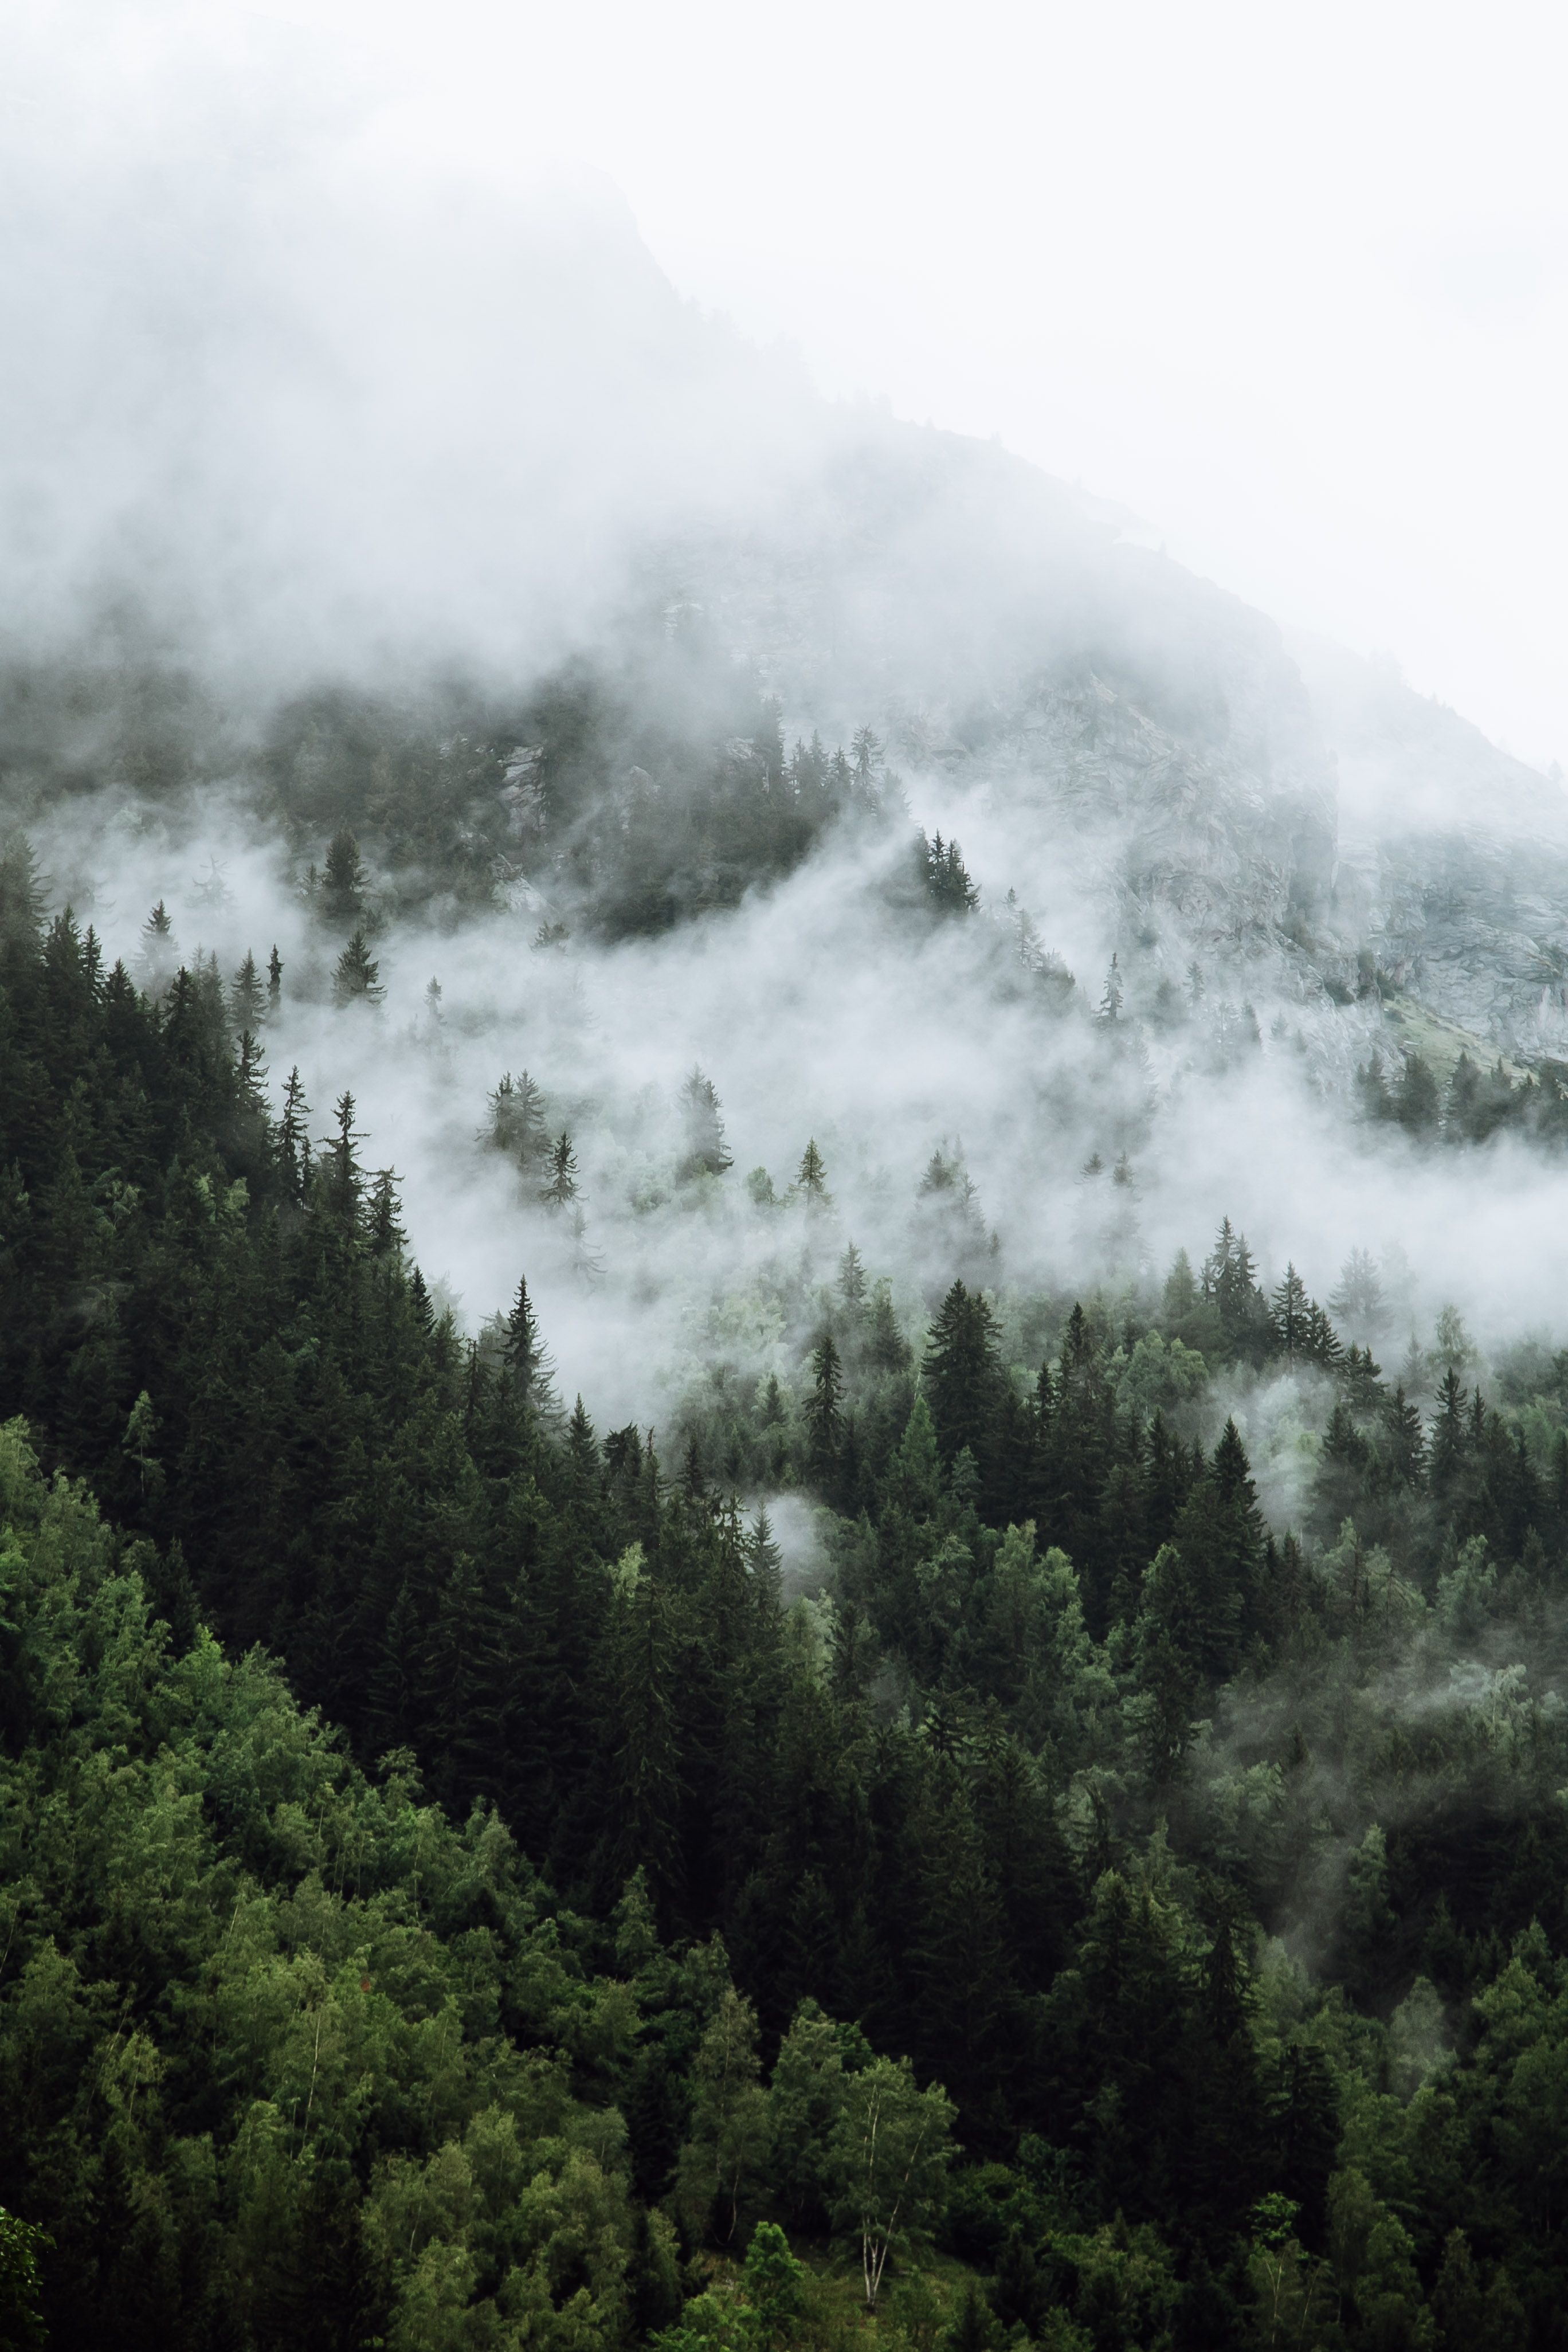 A foggy forest with pine trees on a mountain - Fog